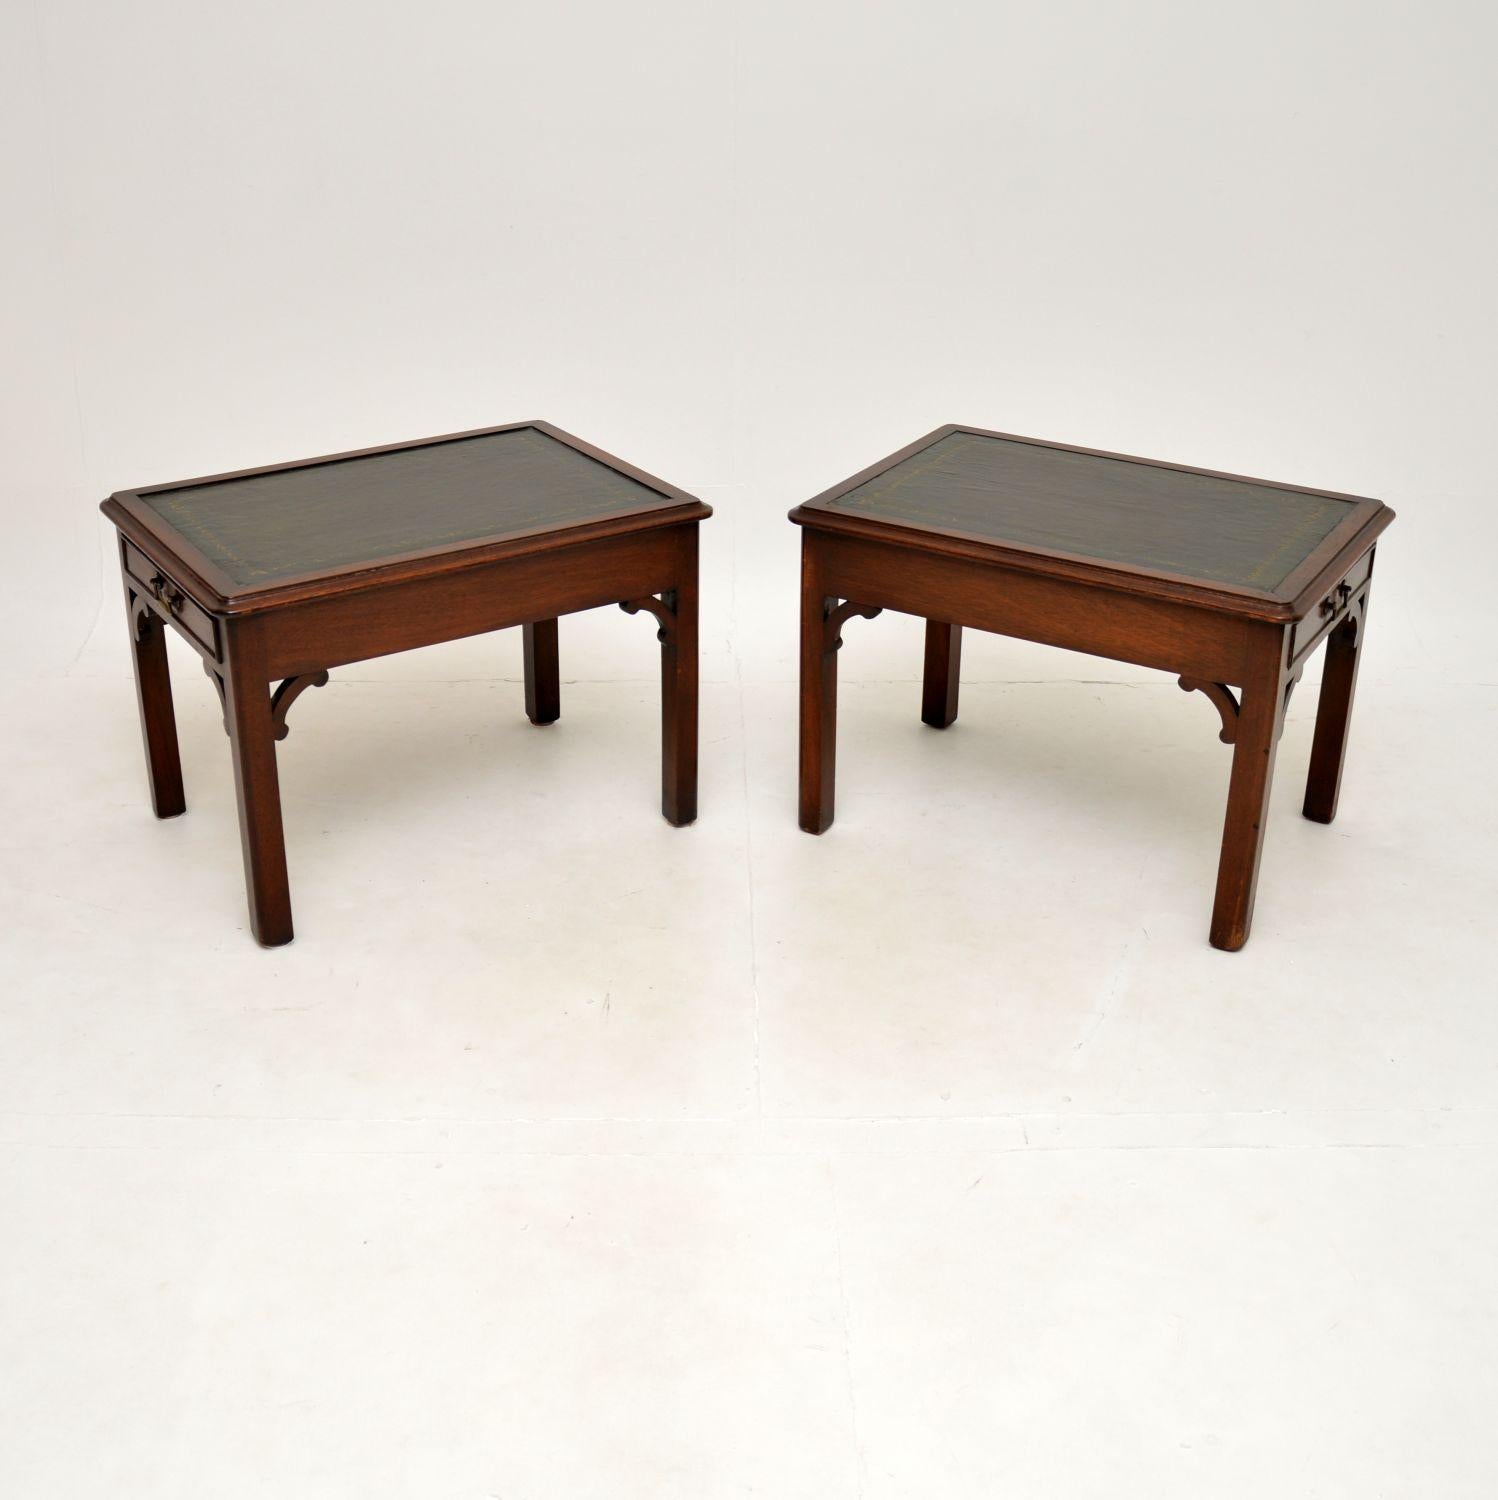 British Pair of Antique Leather Top Side Tables For Sale